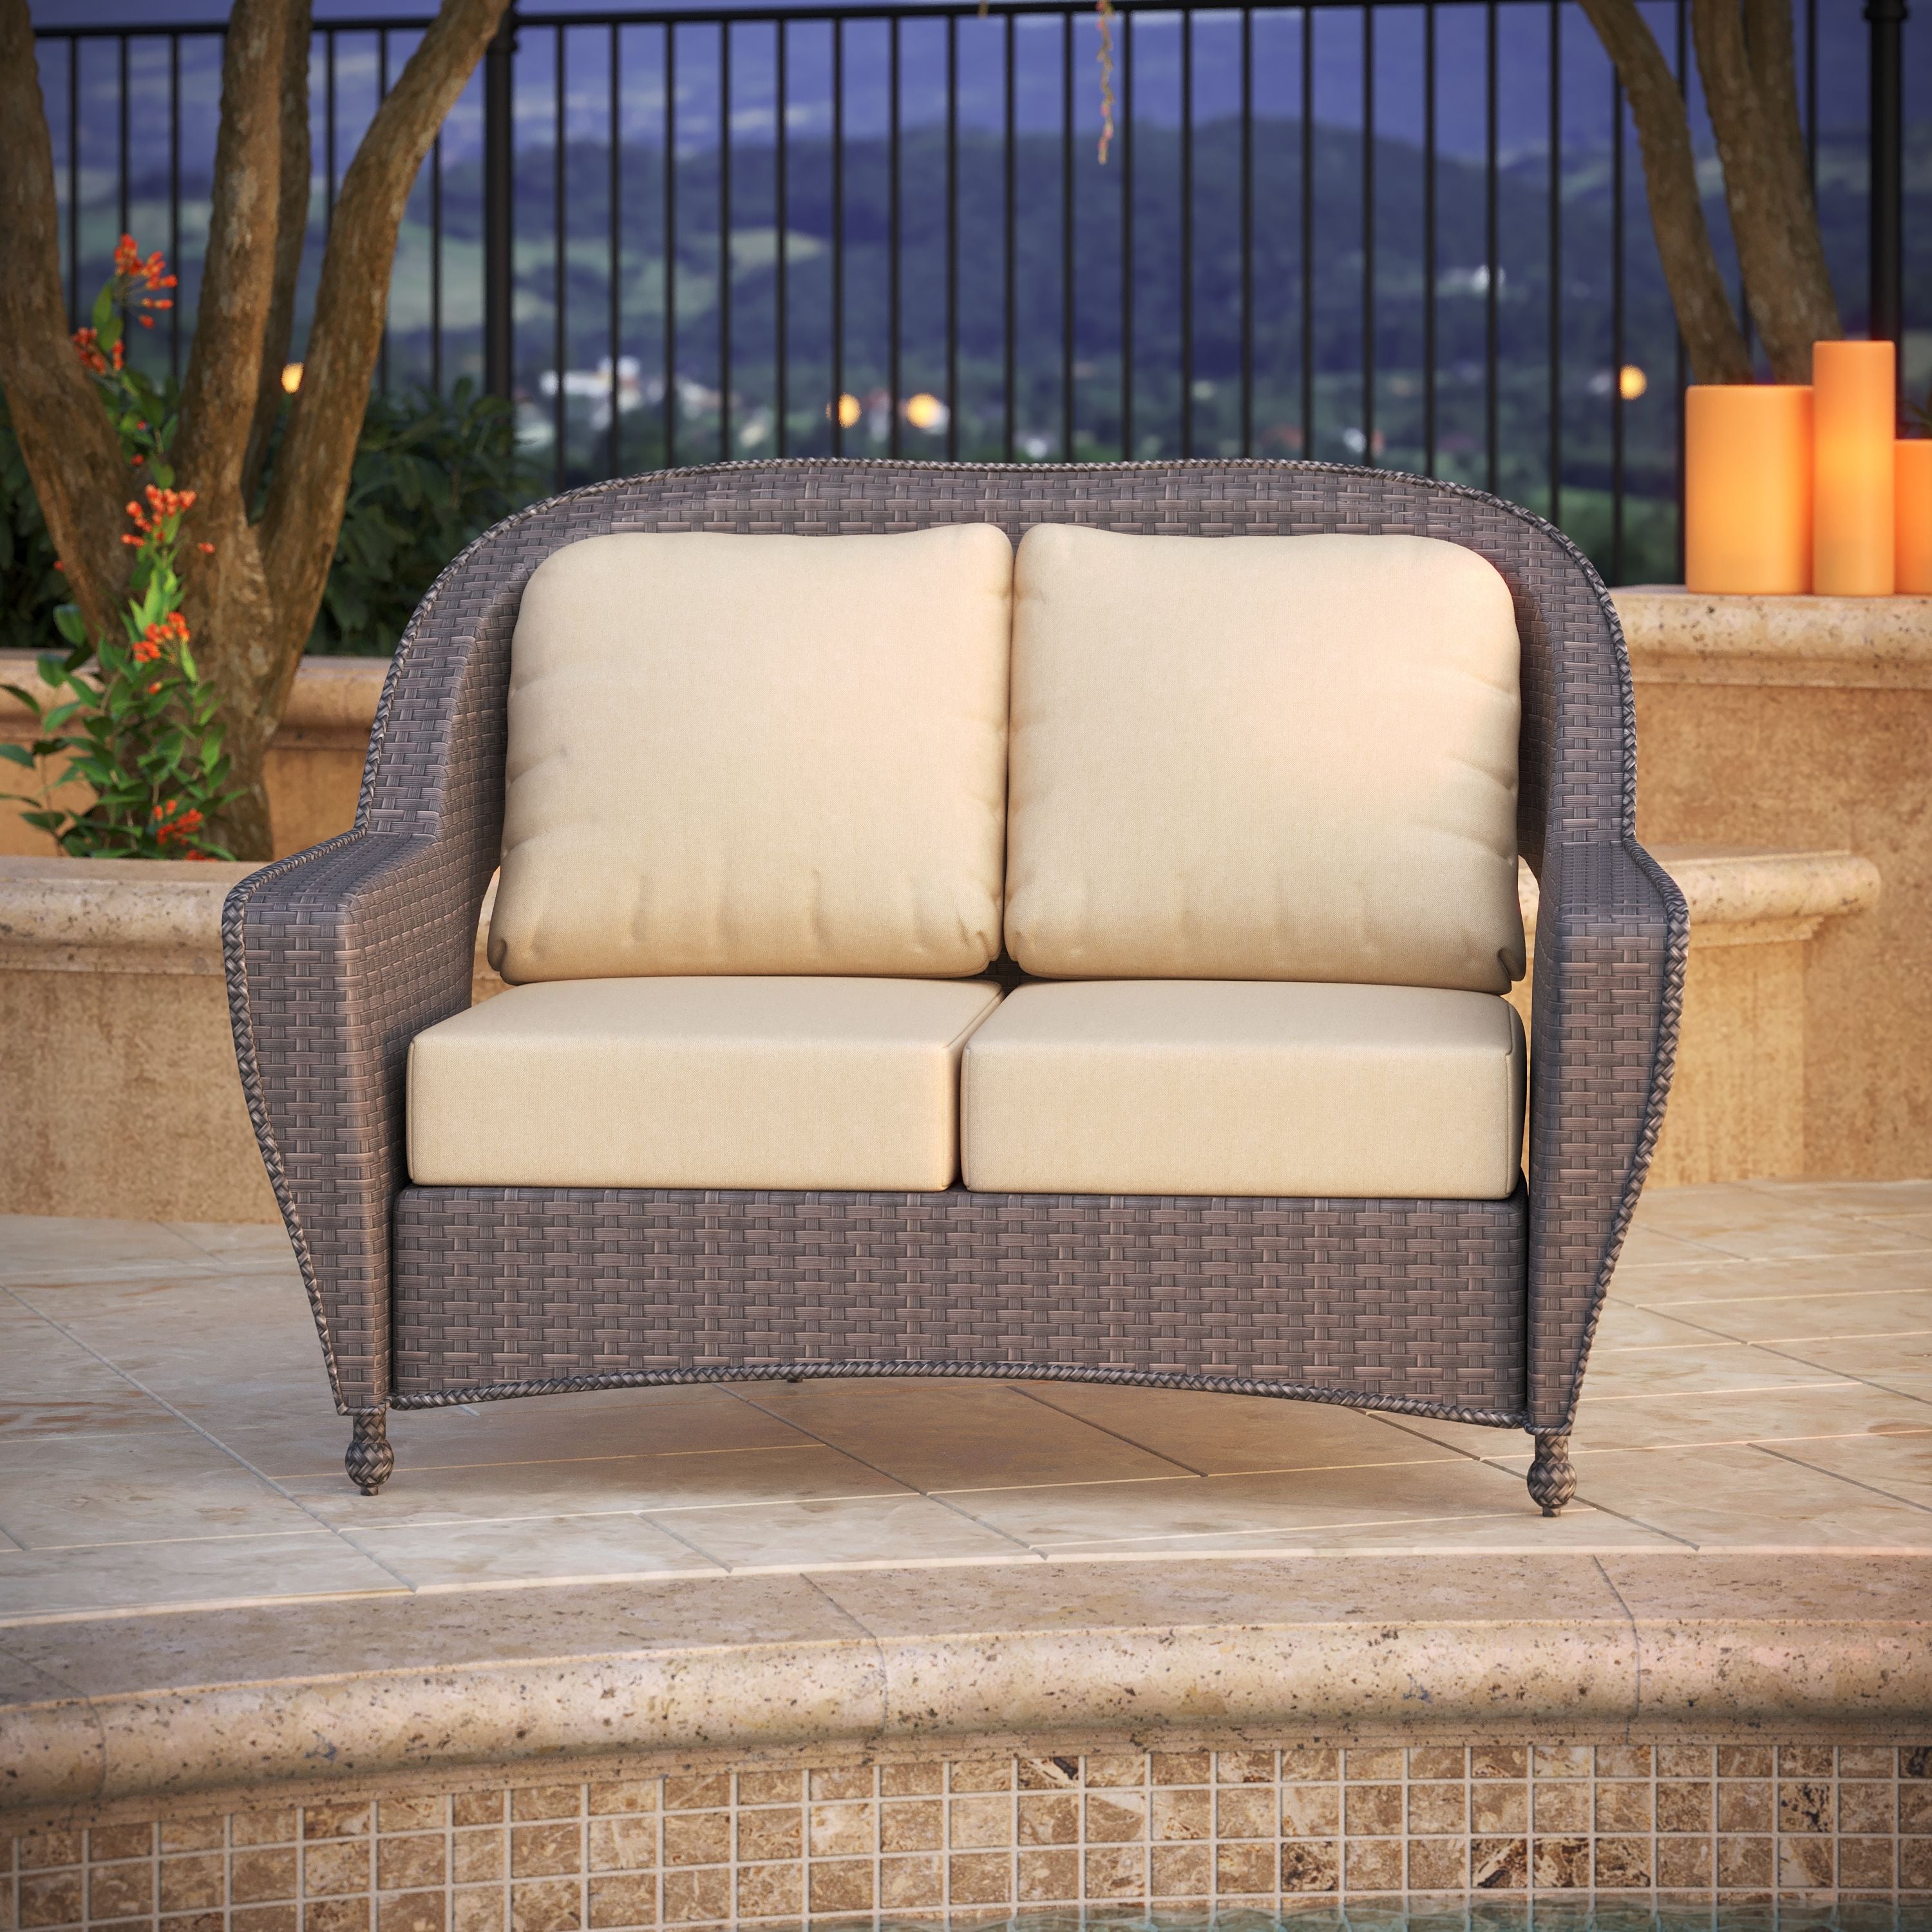 Outdoor-USA Seat and Back/Deep Seating Sofa/Loveseat Ends Right and Left - Replacement Cushions